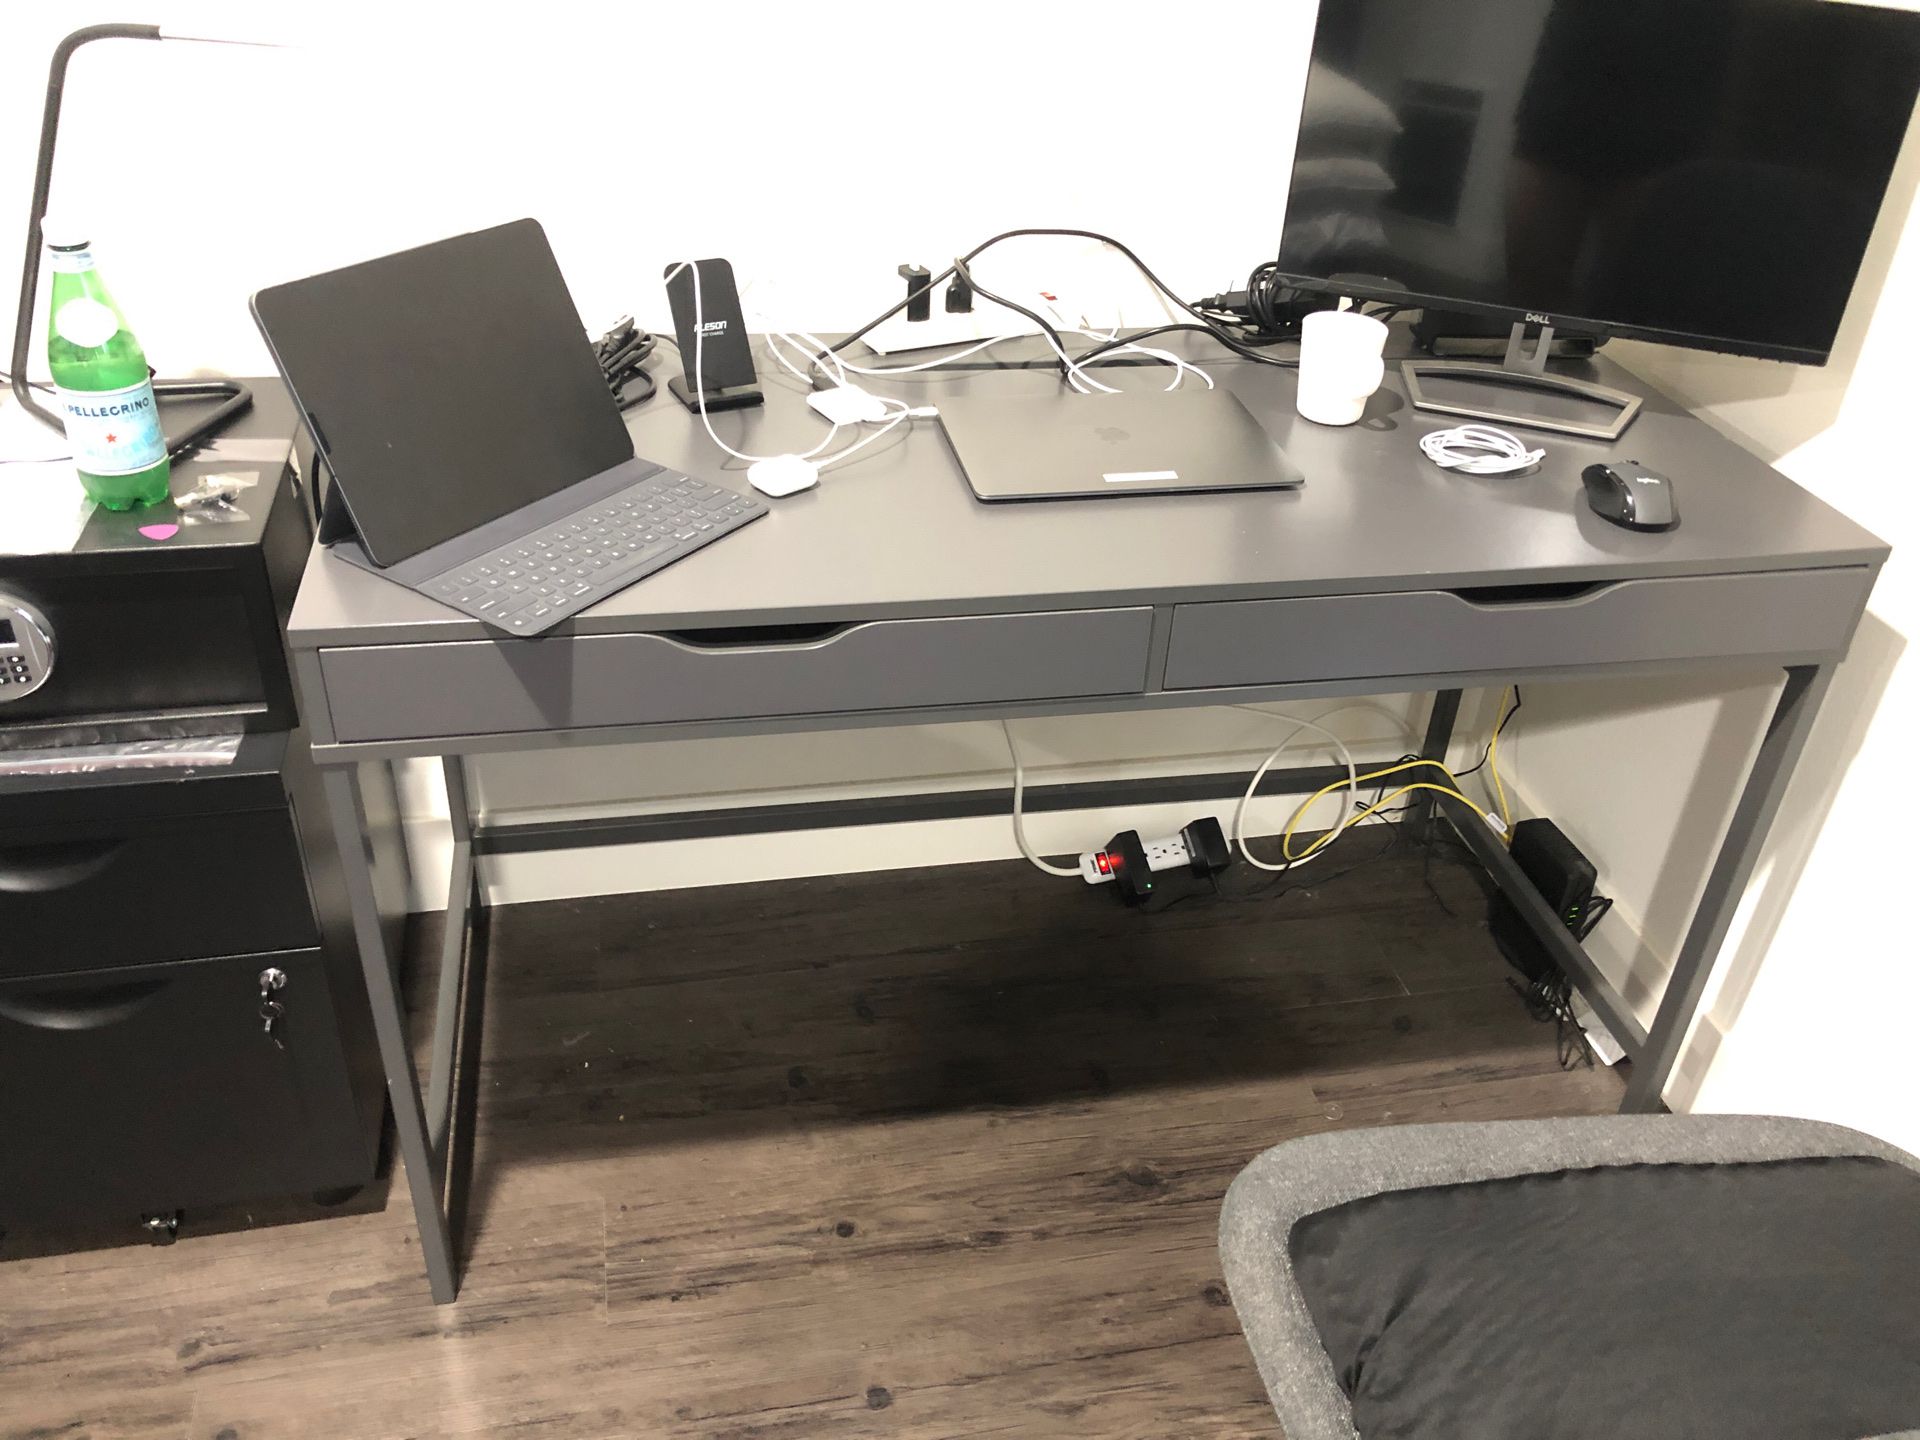 Home office desk and chair - almost sold. Don’t contact :)